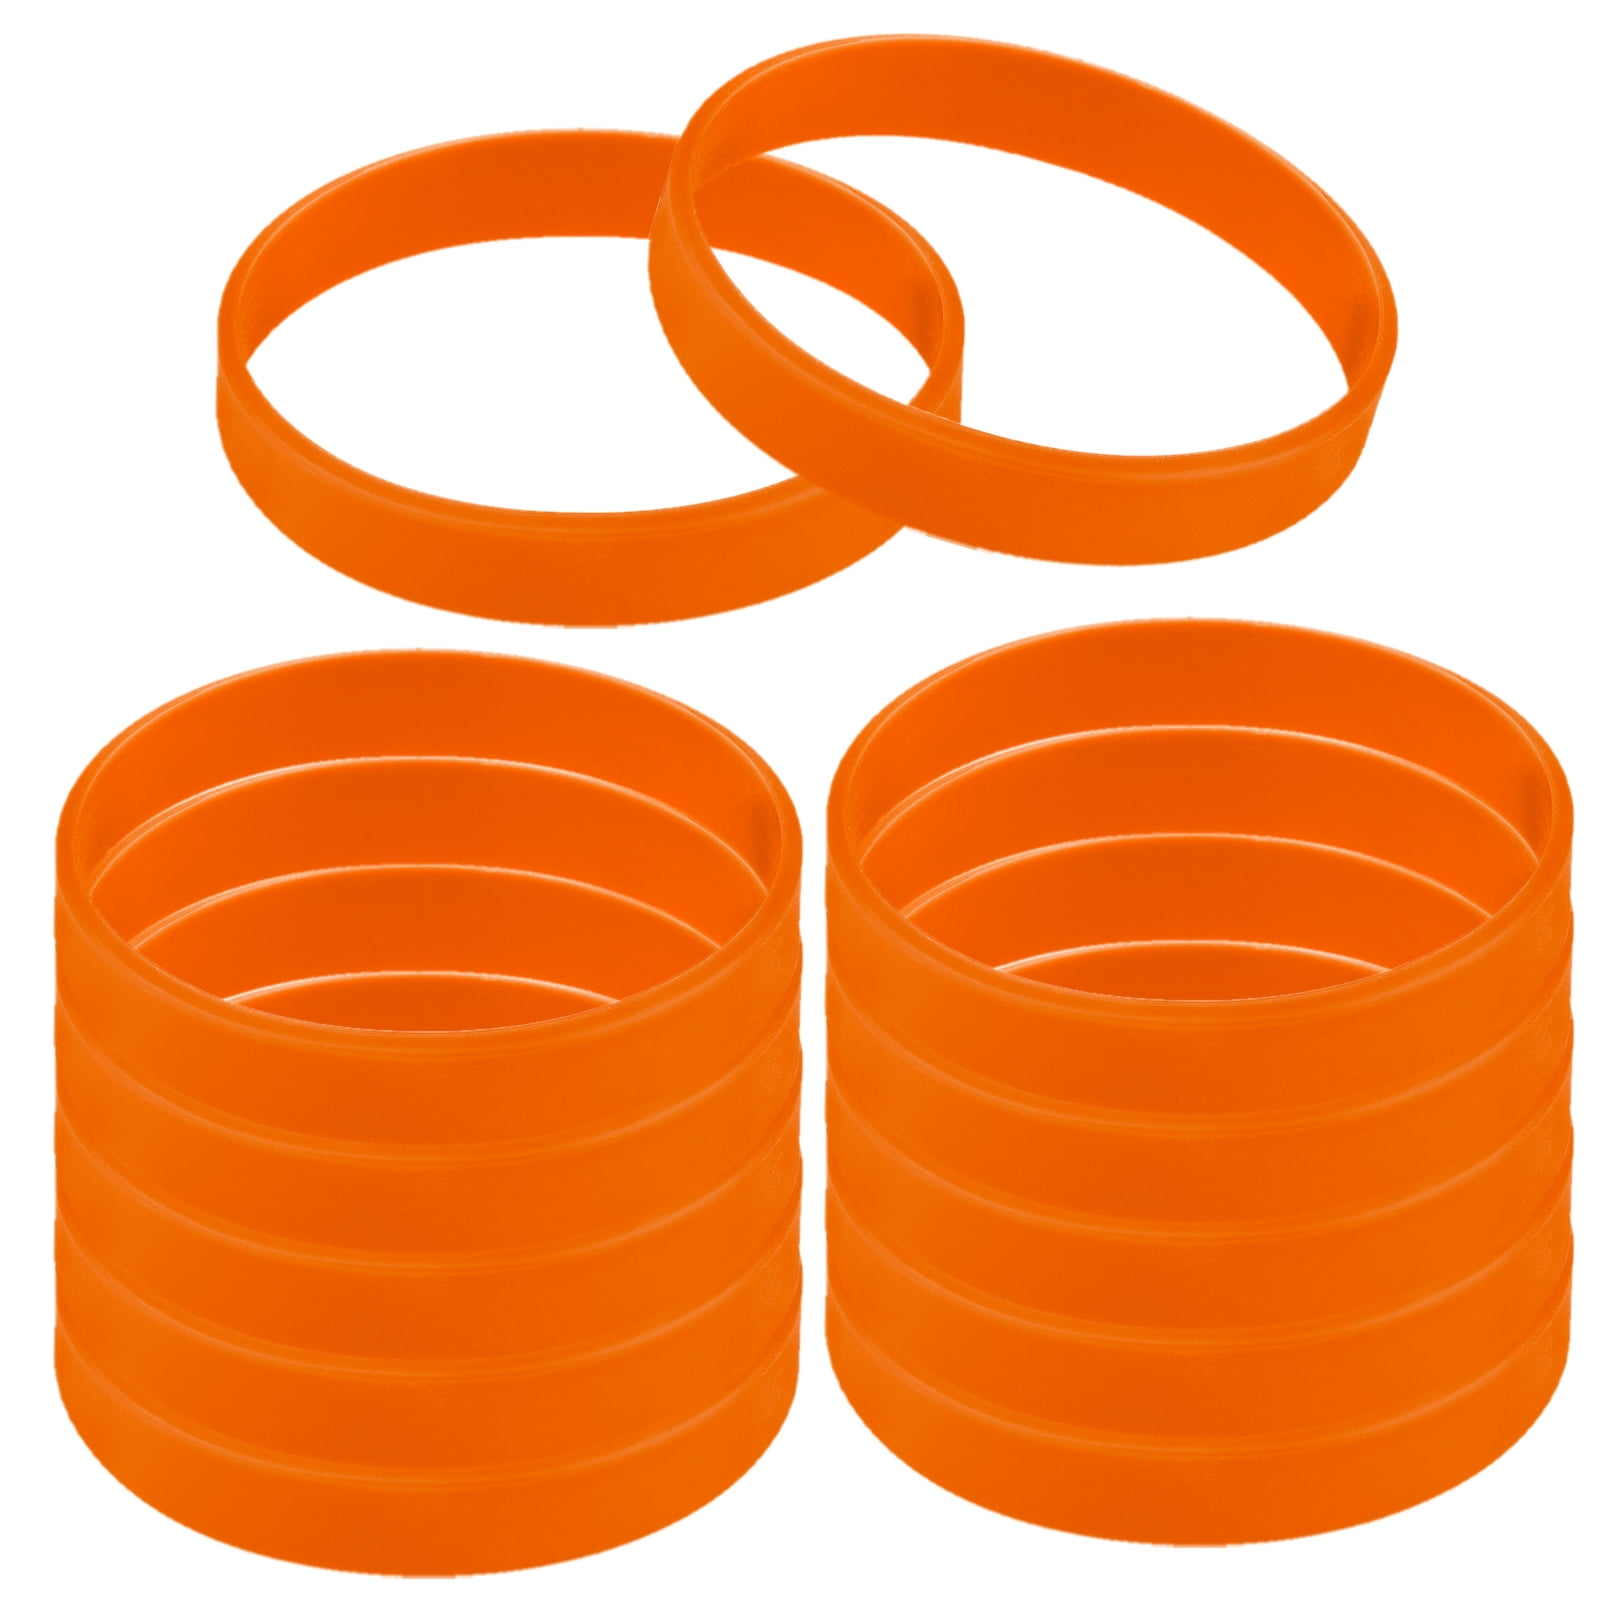 BRAND NEW Adult/Youth 1/2 Inch Silicone Wristbands Rubber